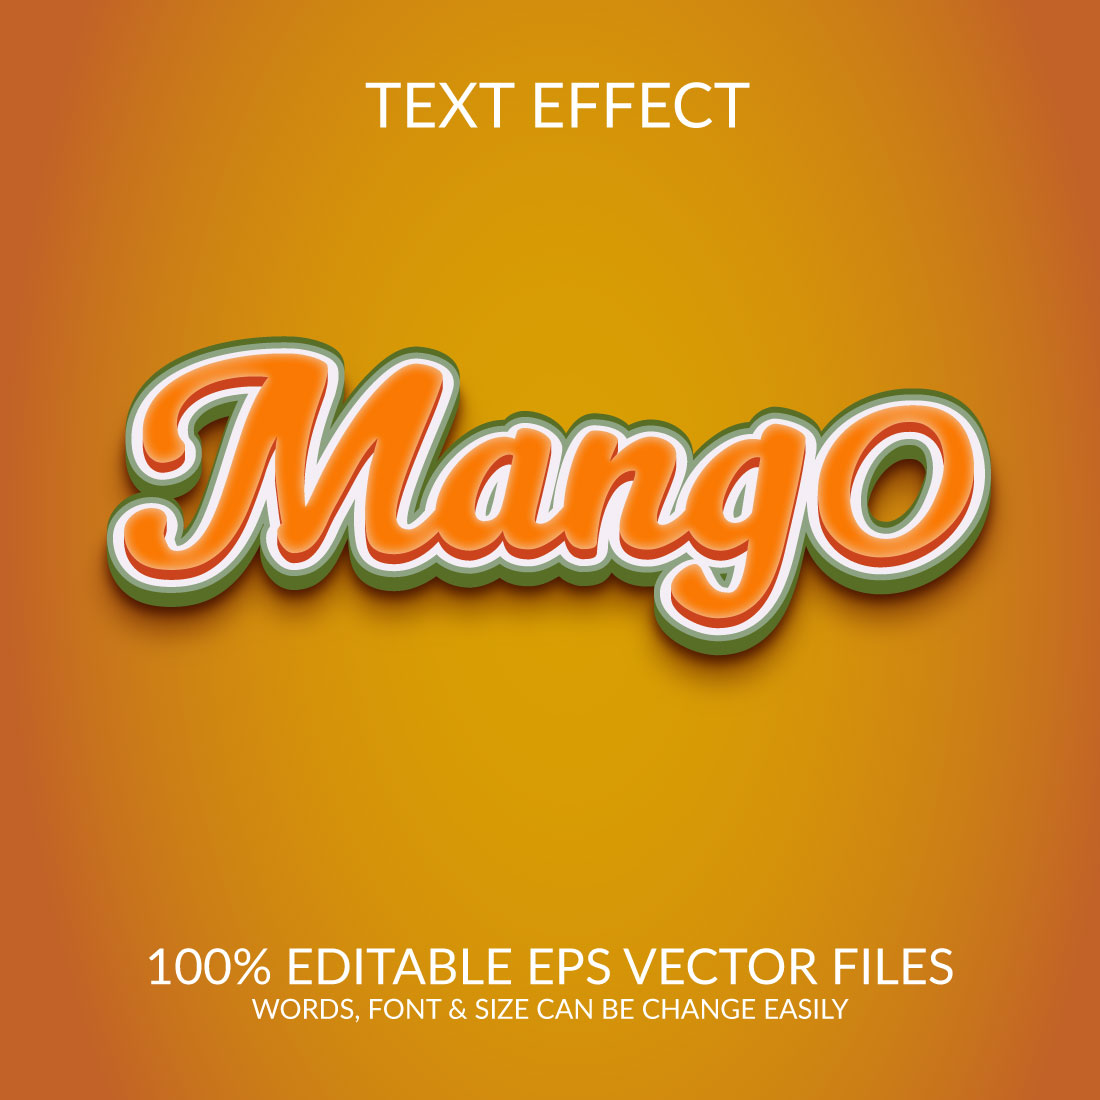 Mango fully editable vector text effect cover image.